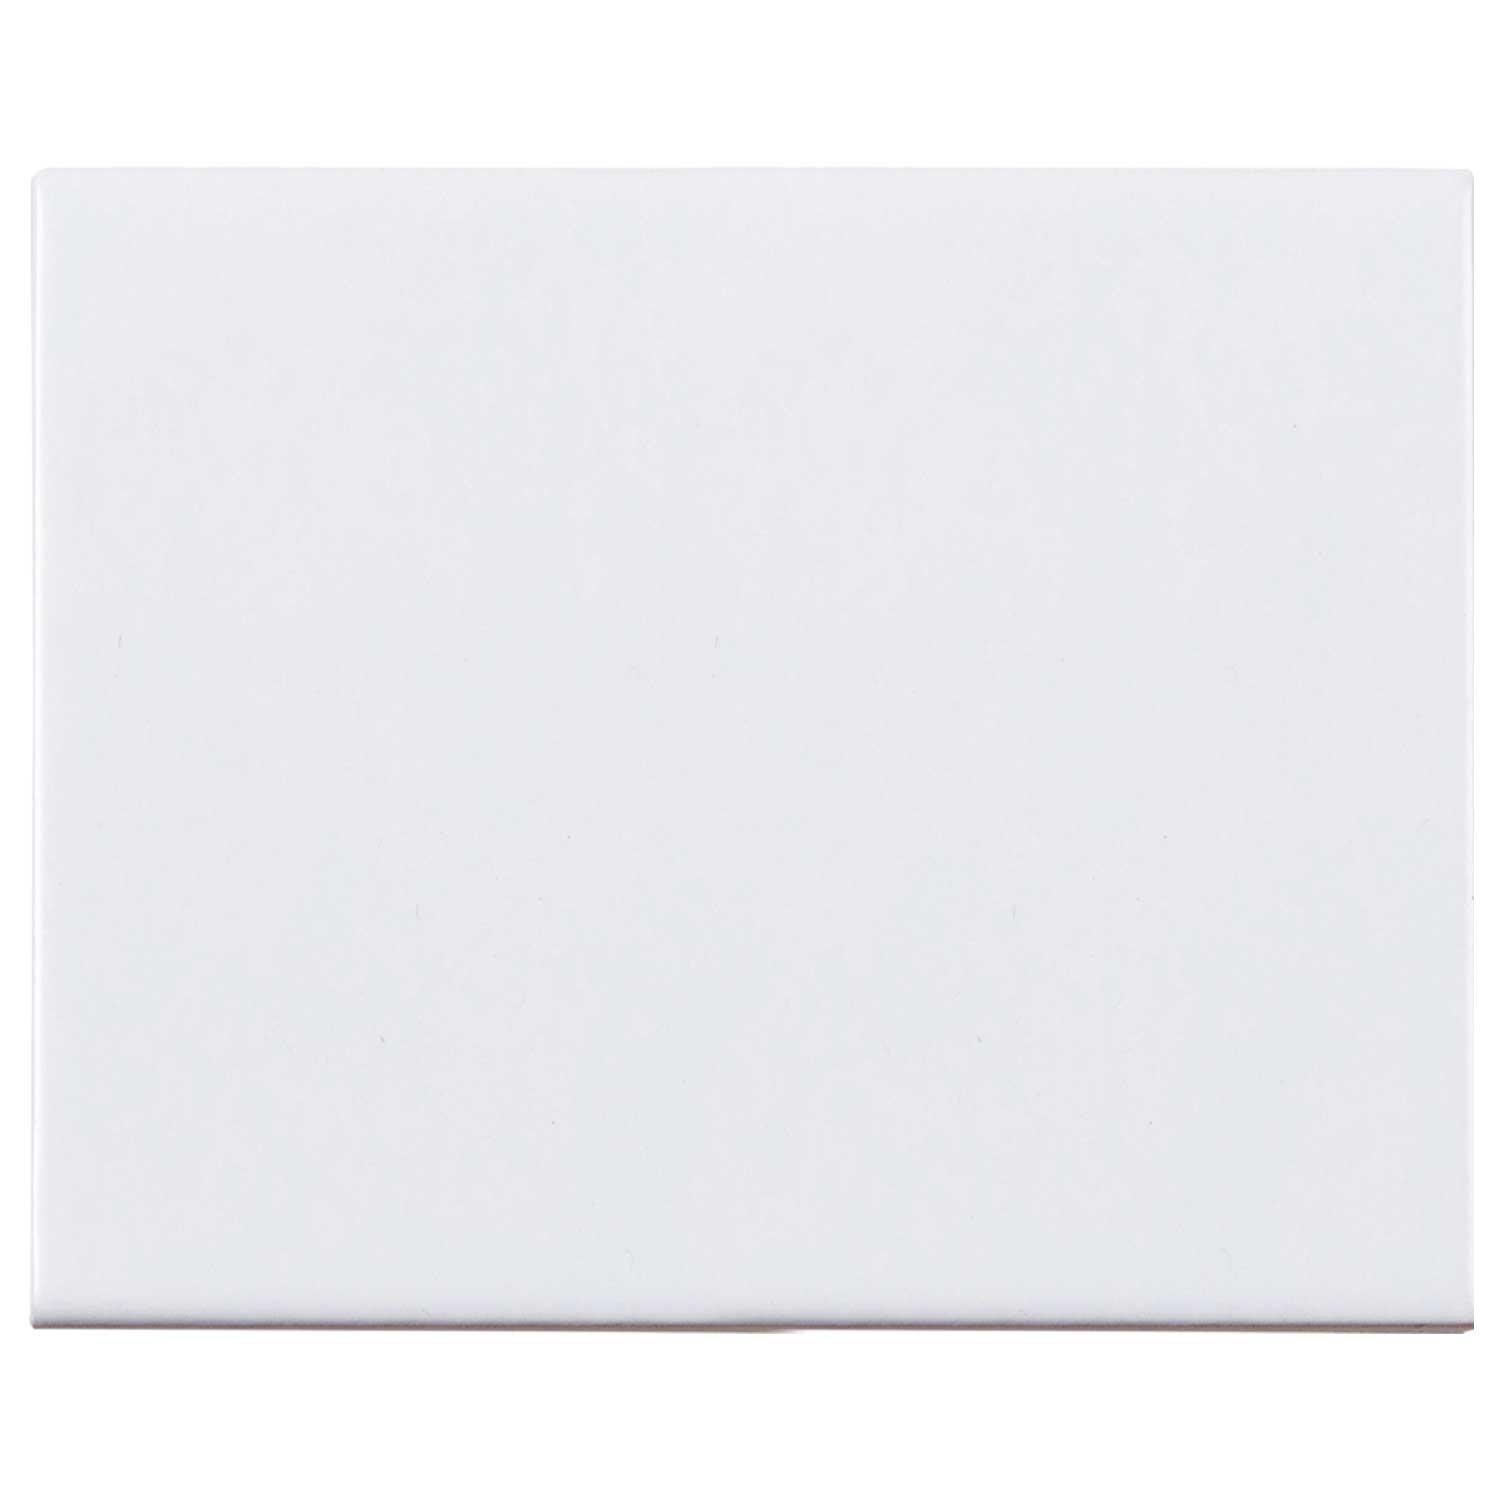 Classic White Ceramic Wall Tile Subway Style 200x250mm